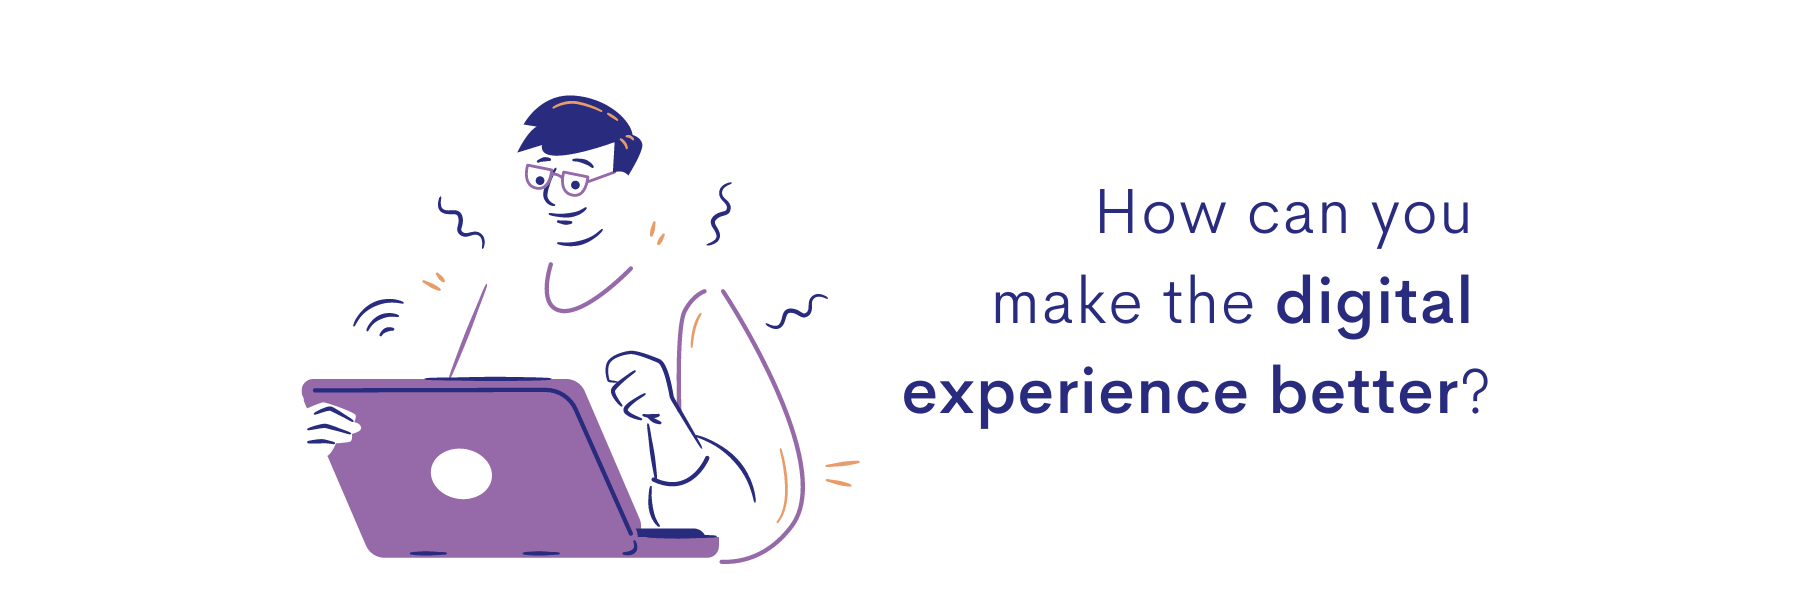 How can you make the digital experience better?